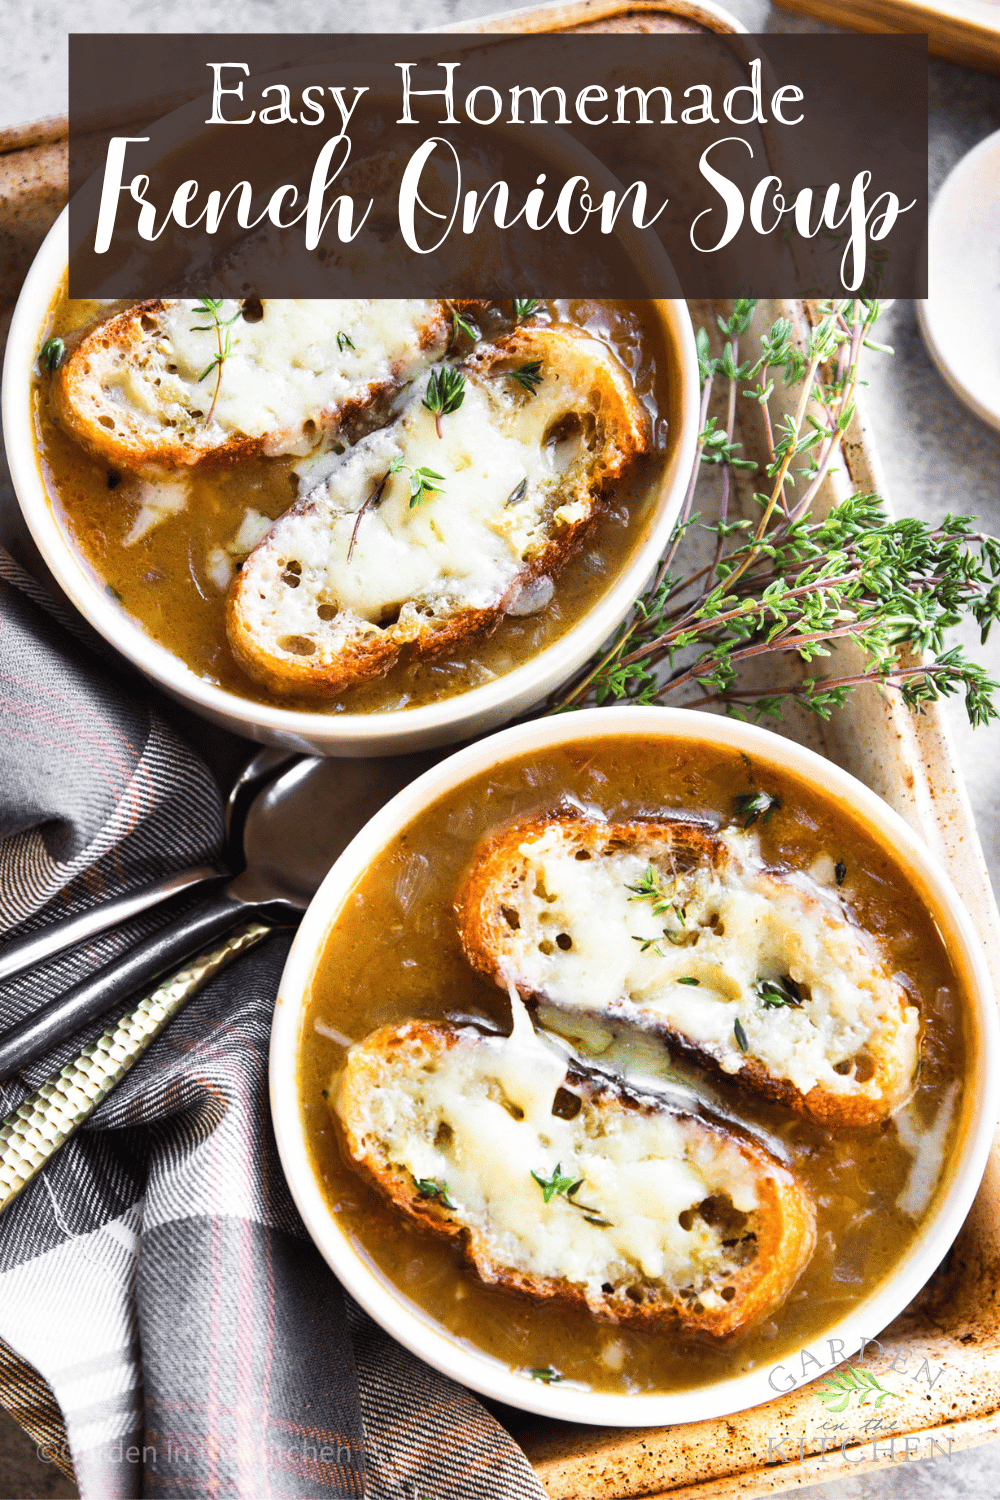 pinterest image of 2 white bowls of french onion soup topped with toasted bread and melted cheese.